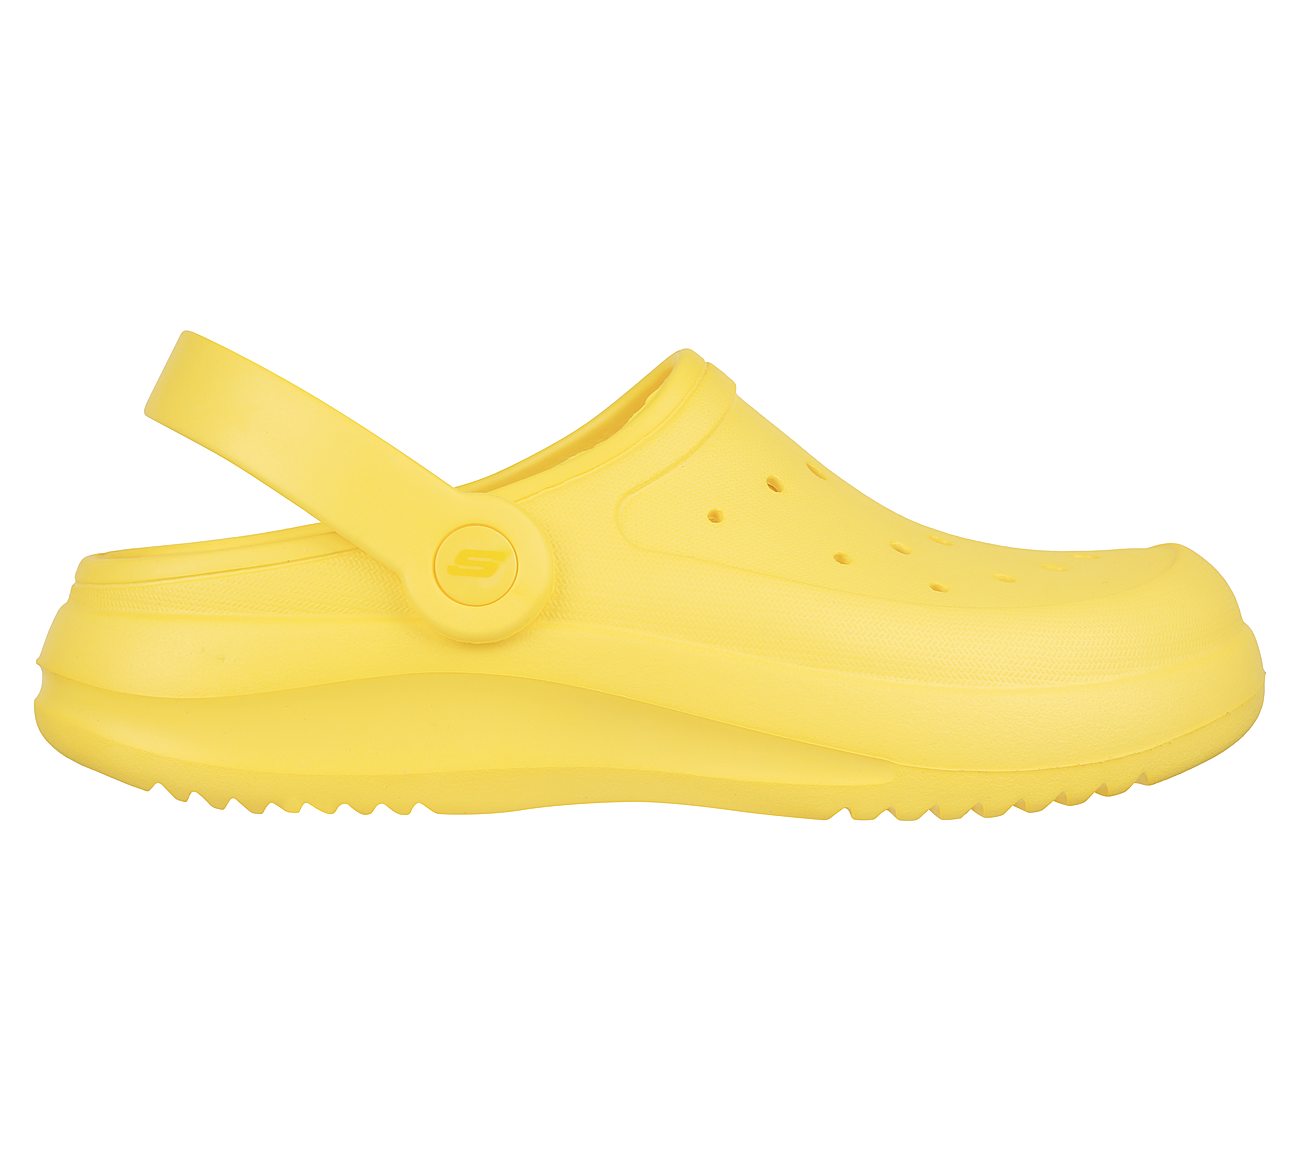 FOAMIES - SUMMER CHILL, YELLOW Footwear Right View